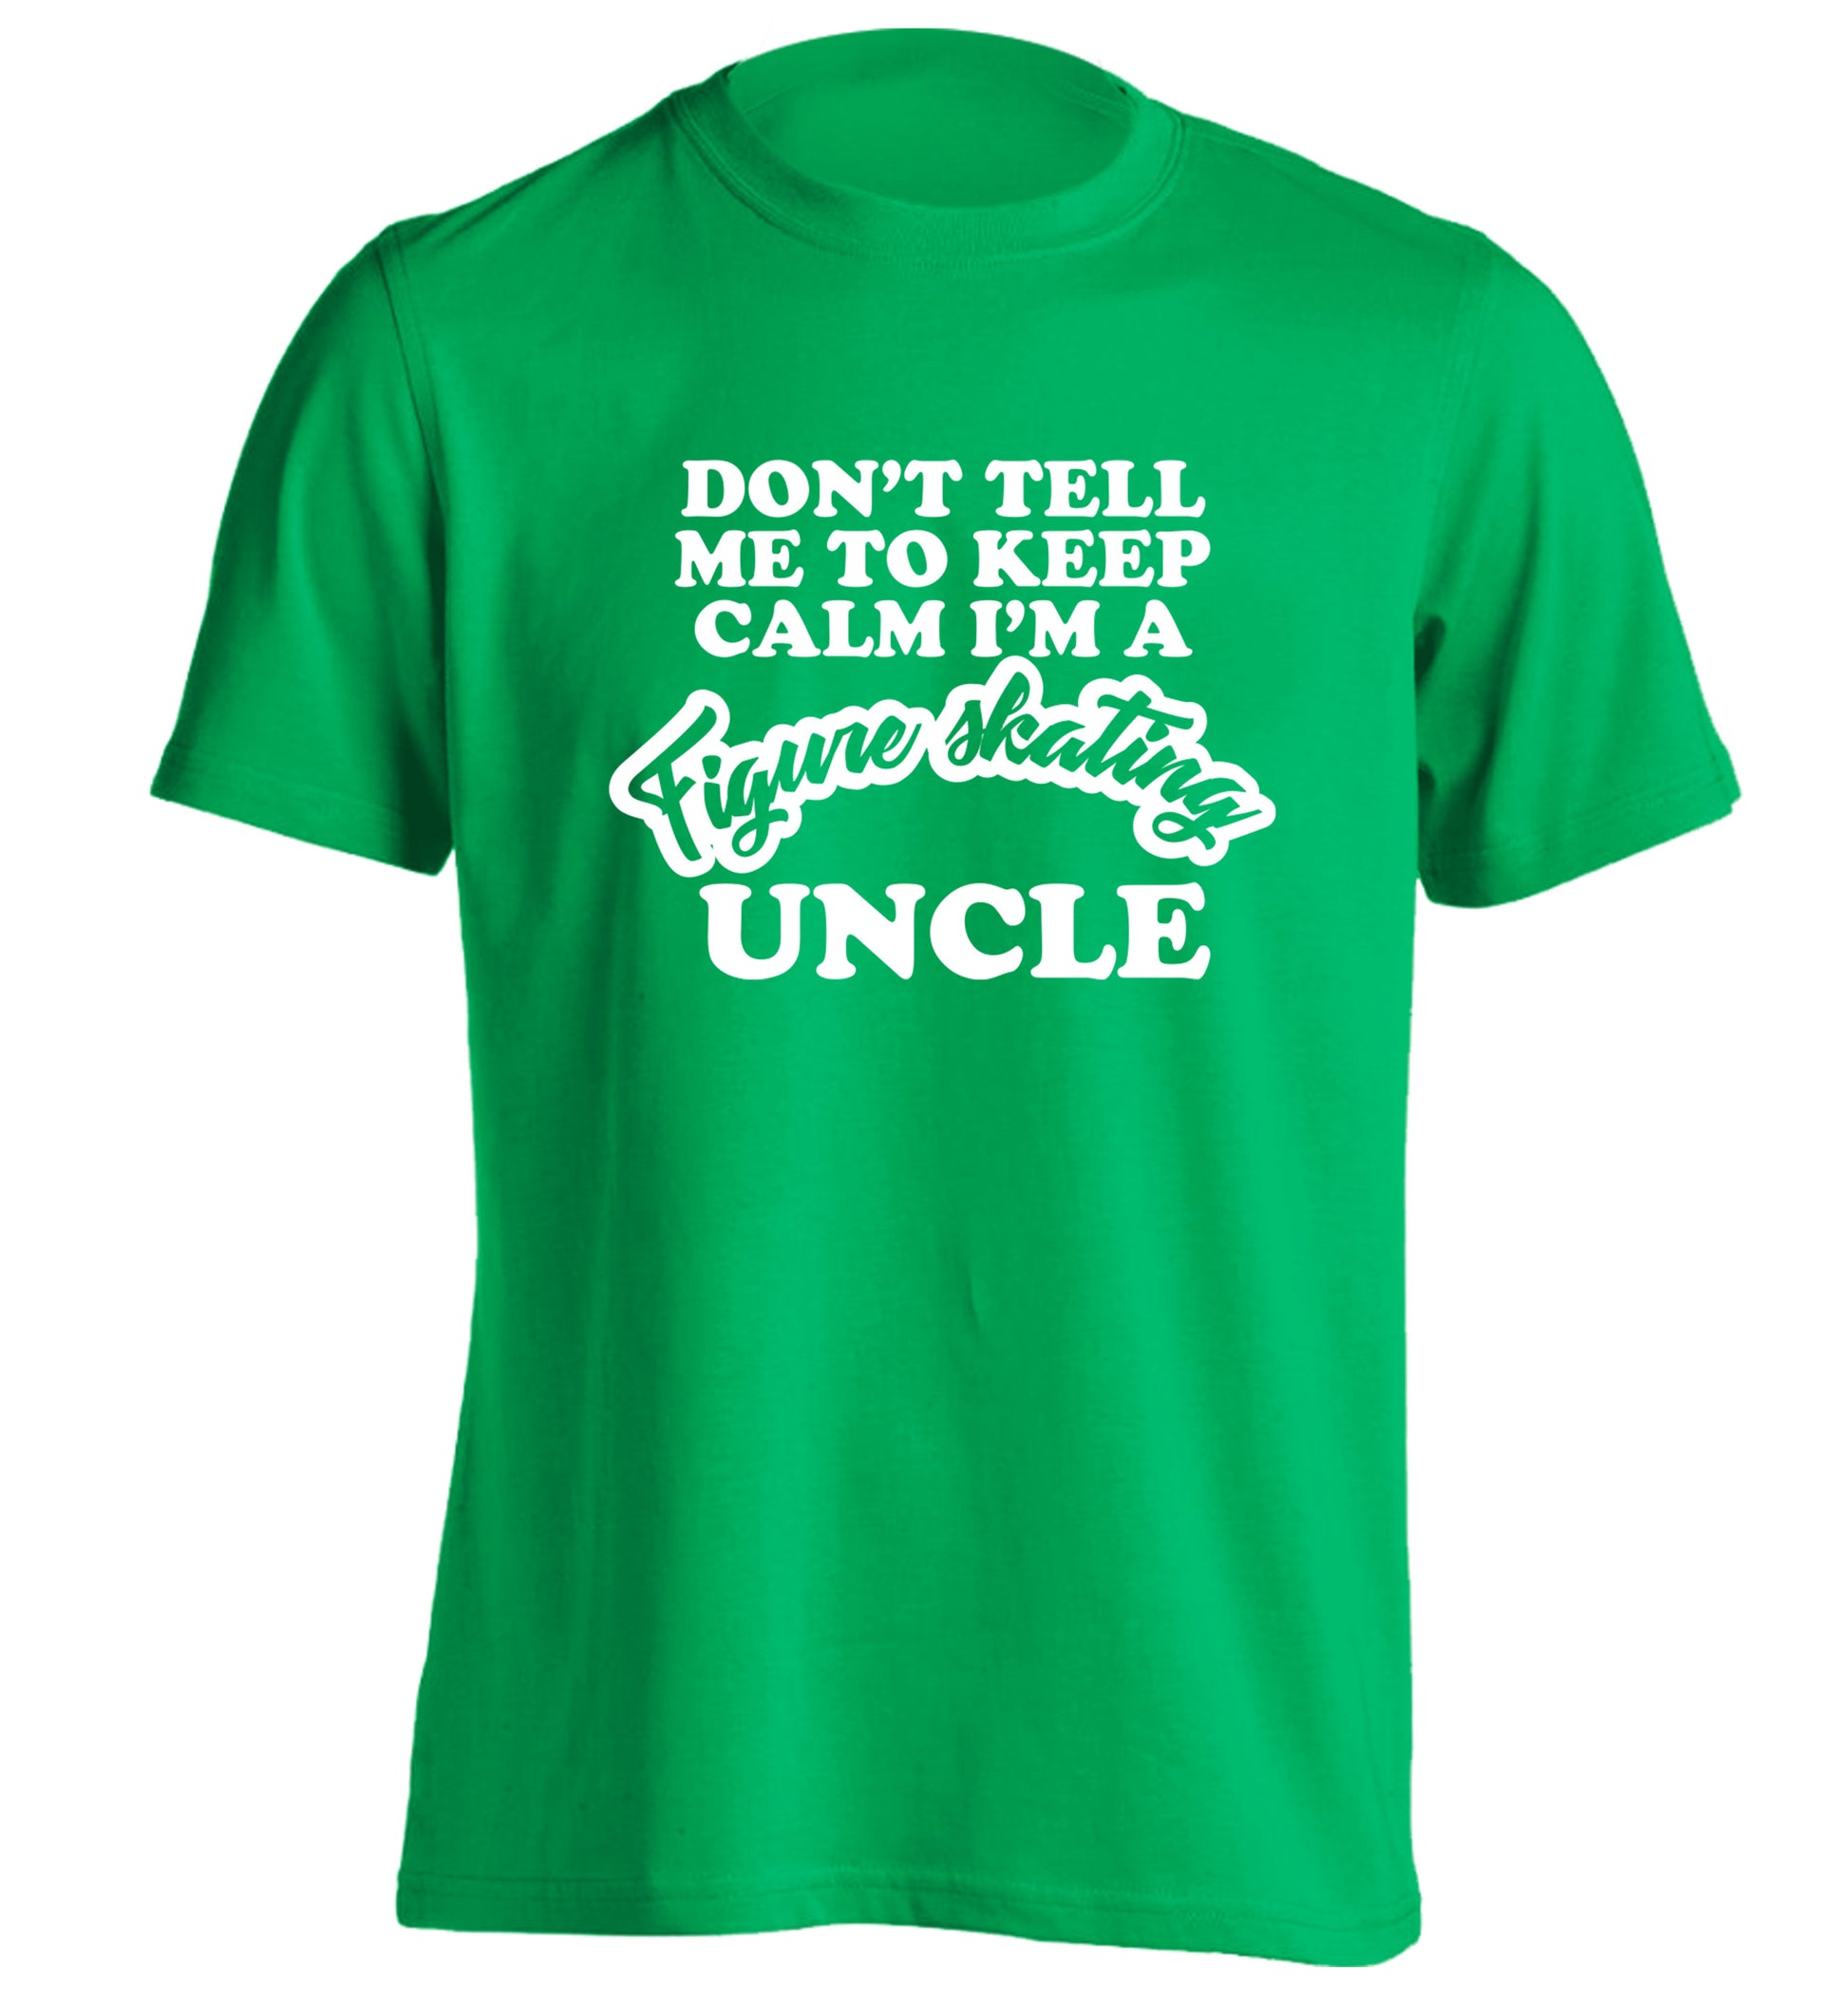 Don't tell me to keep calm I'm a figure skating uncle adults unisexgreen Tshirt 2XL